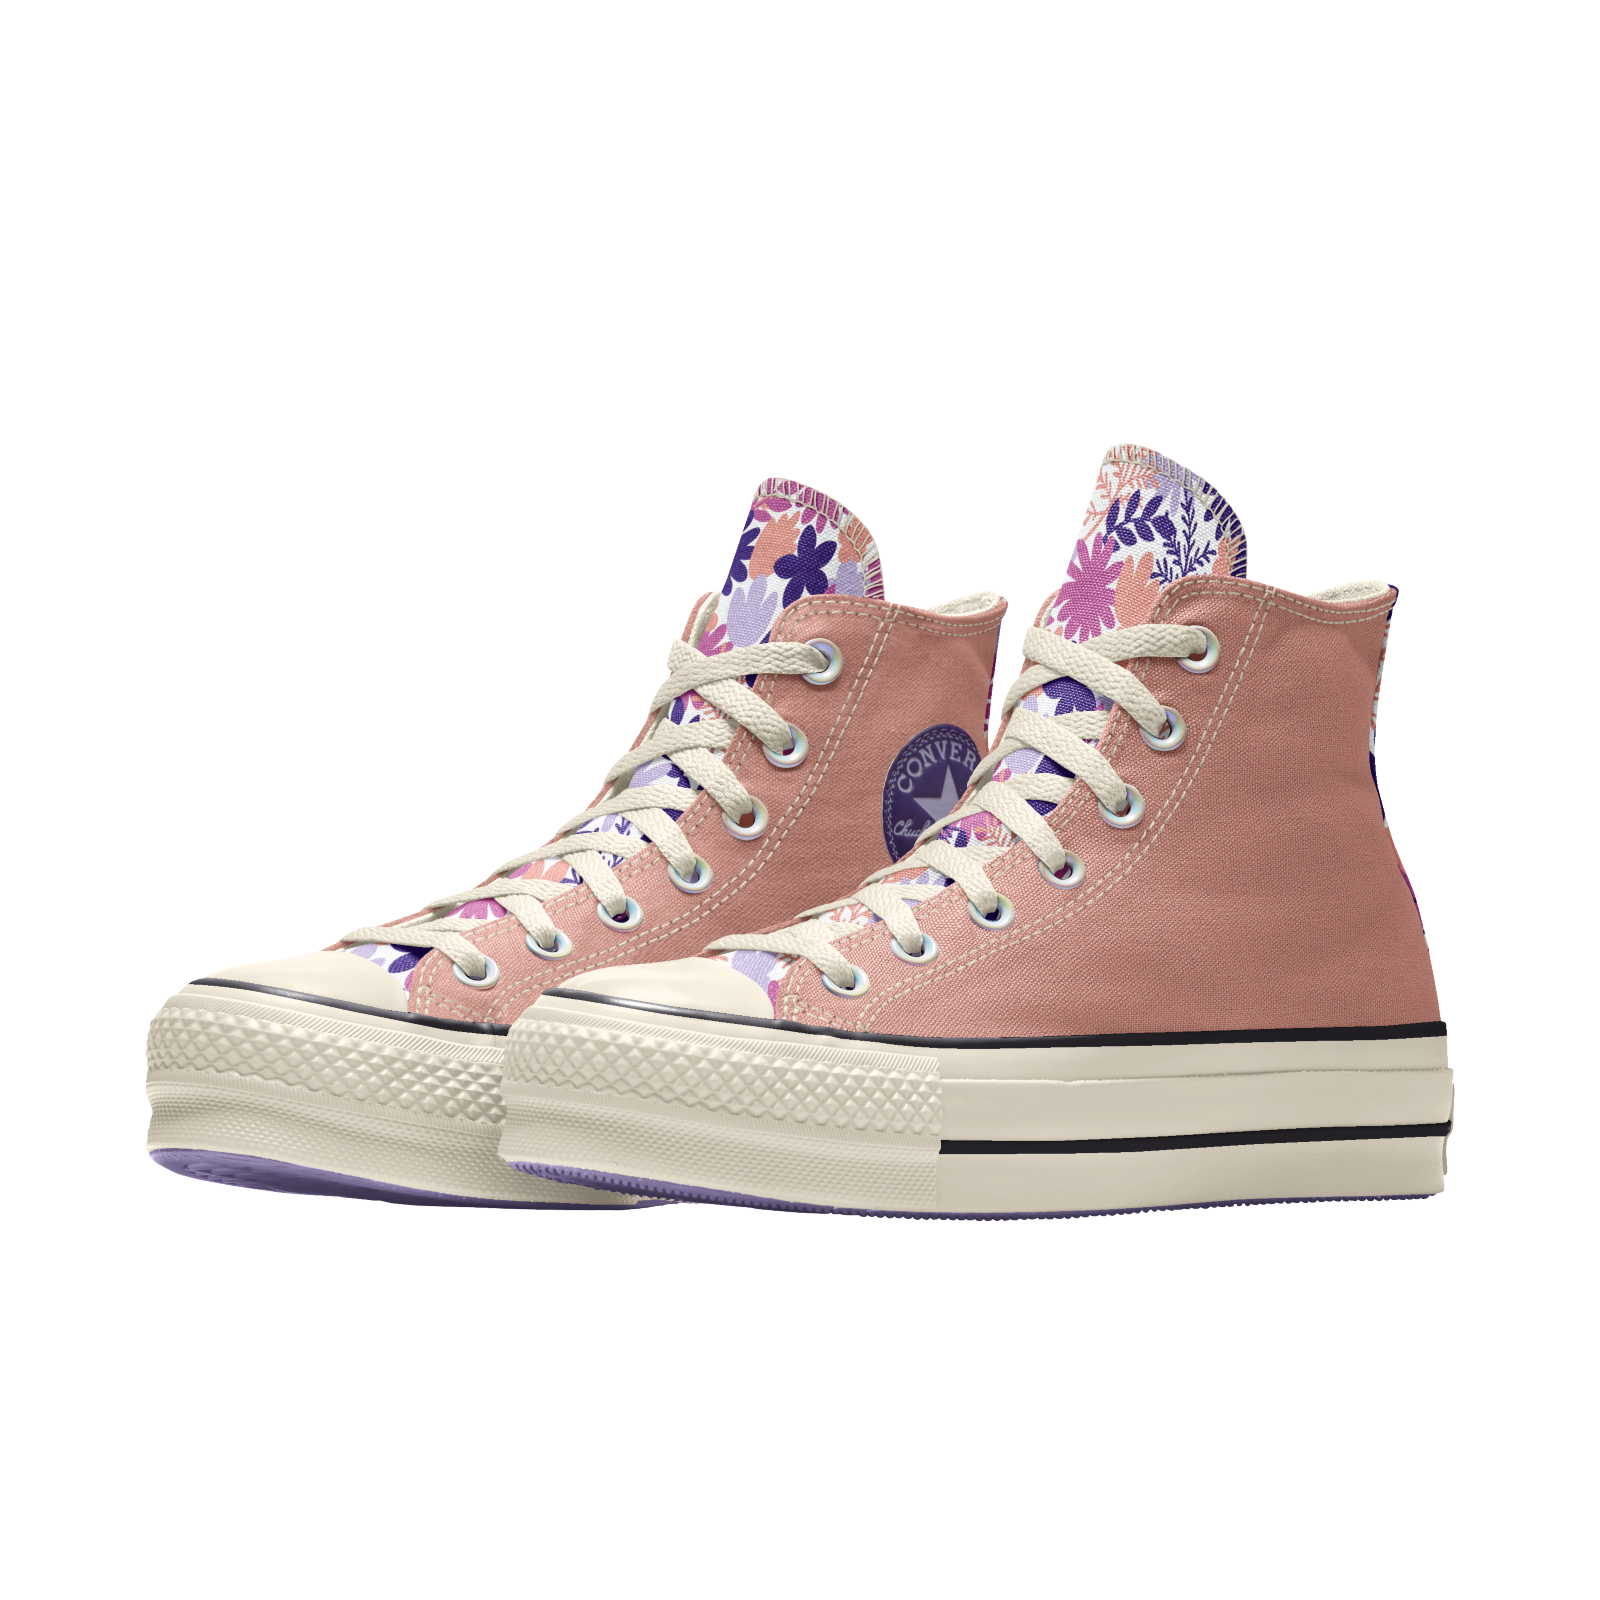 Converse By You x Florence By Mills Platform Chuck Taylor All Star